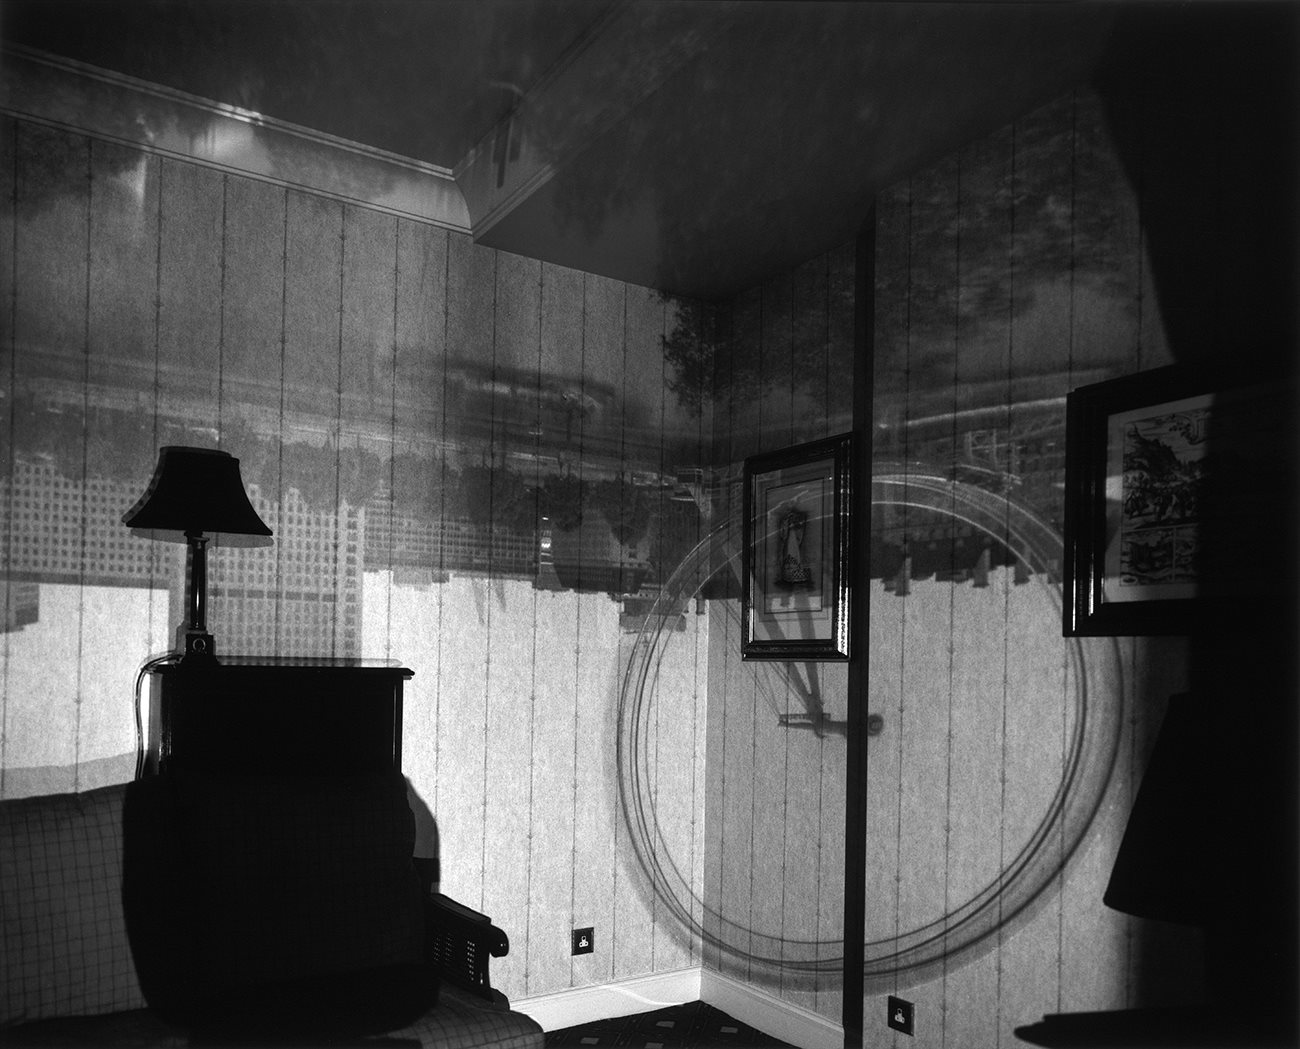 Camera Obscura, Image of London Eye Inside the Royal Horseguards Hotel